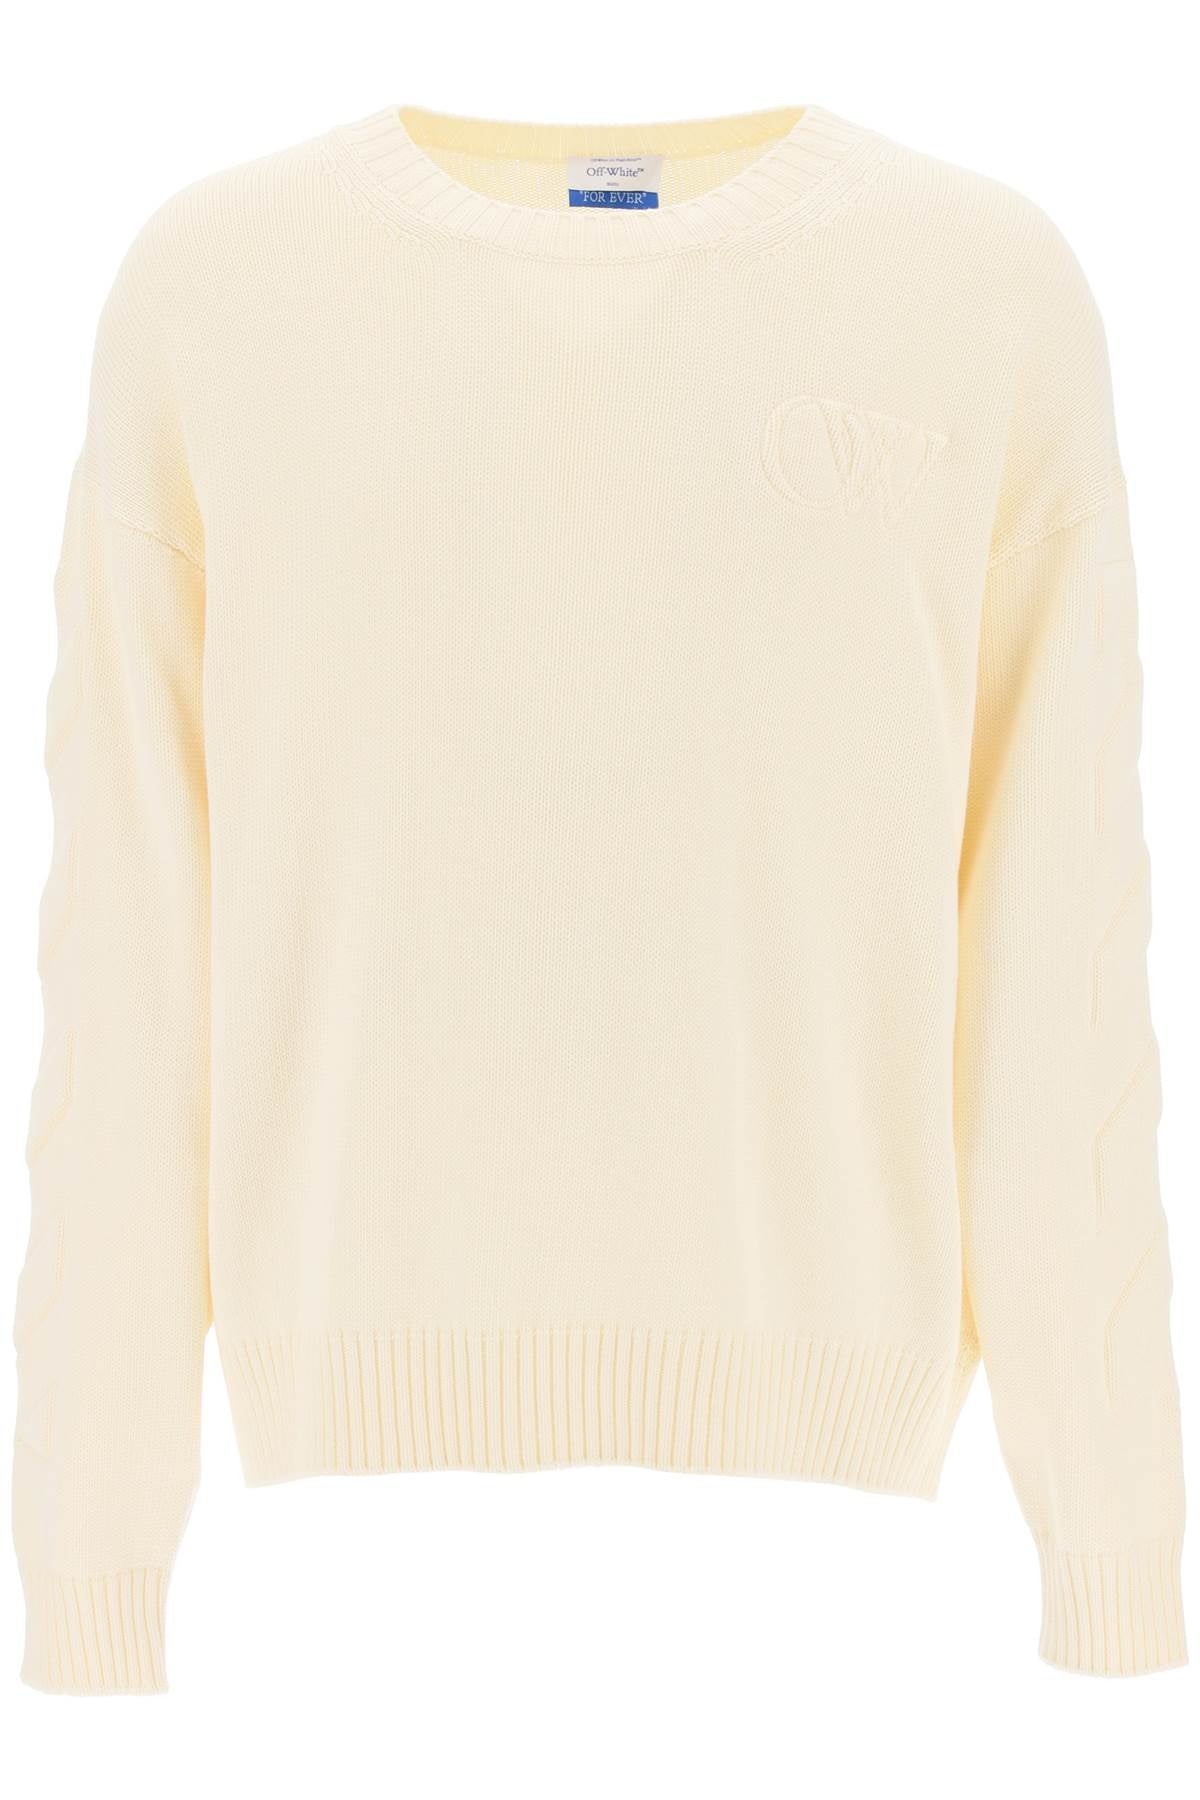 Off-white sweater with embossed diagonal motif-0